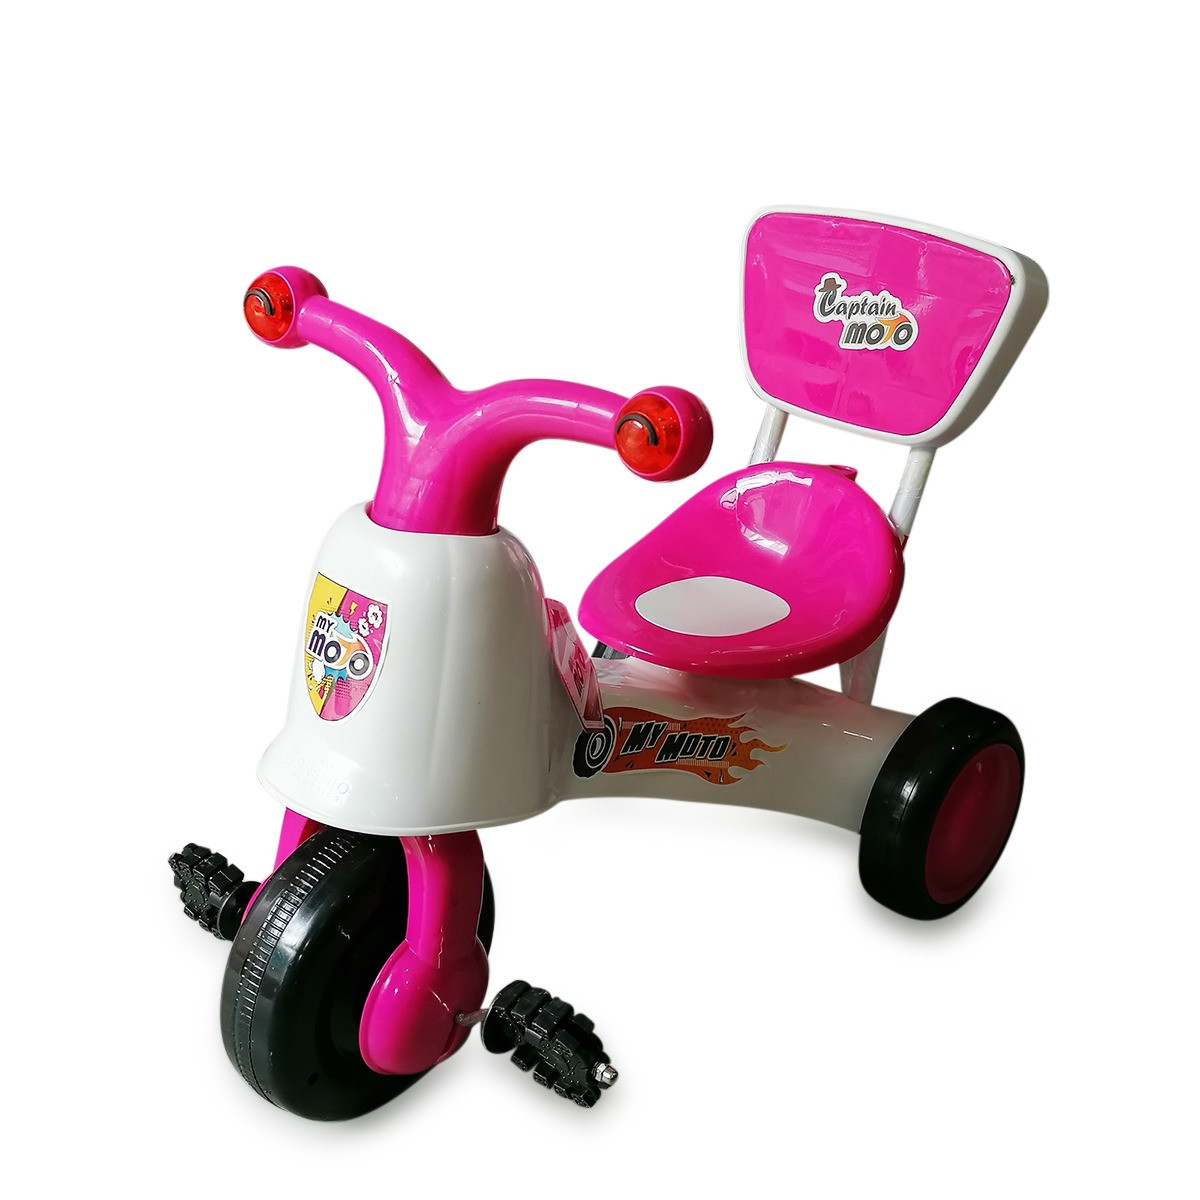 Tricycle / Tricycle for Kids and Babies /A.C.I - My Moto Bike Wings ( With Music )